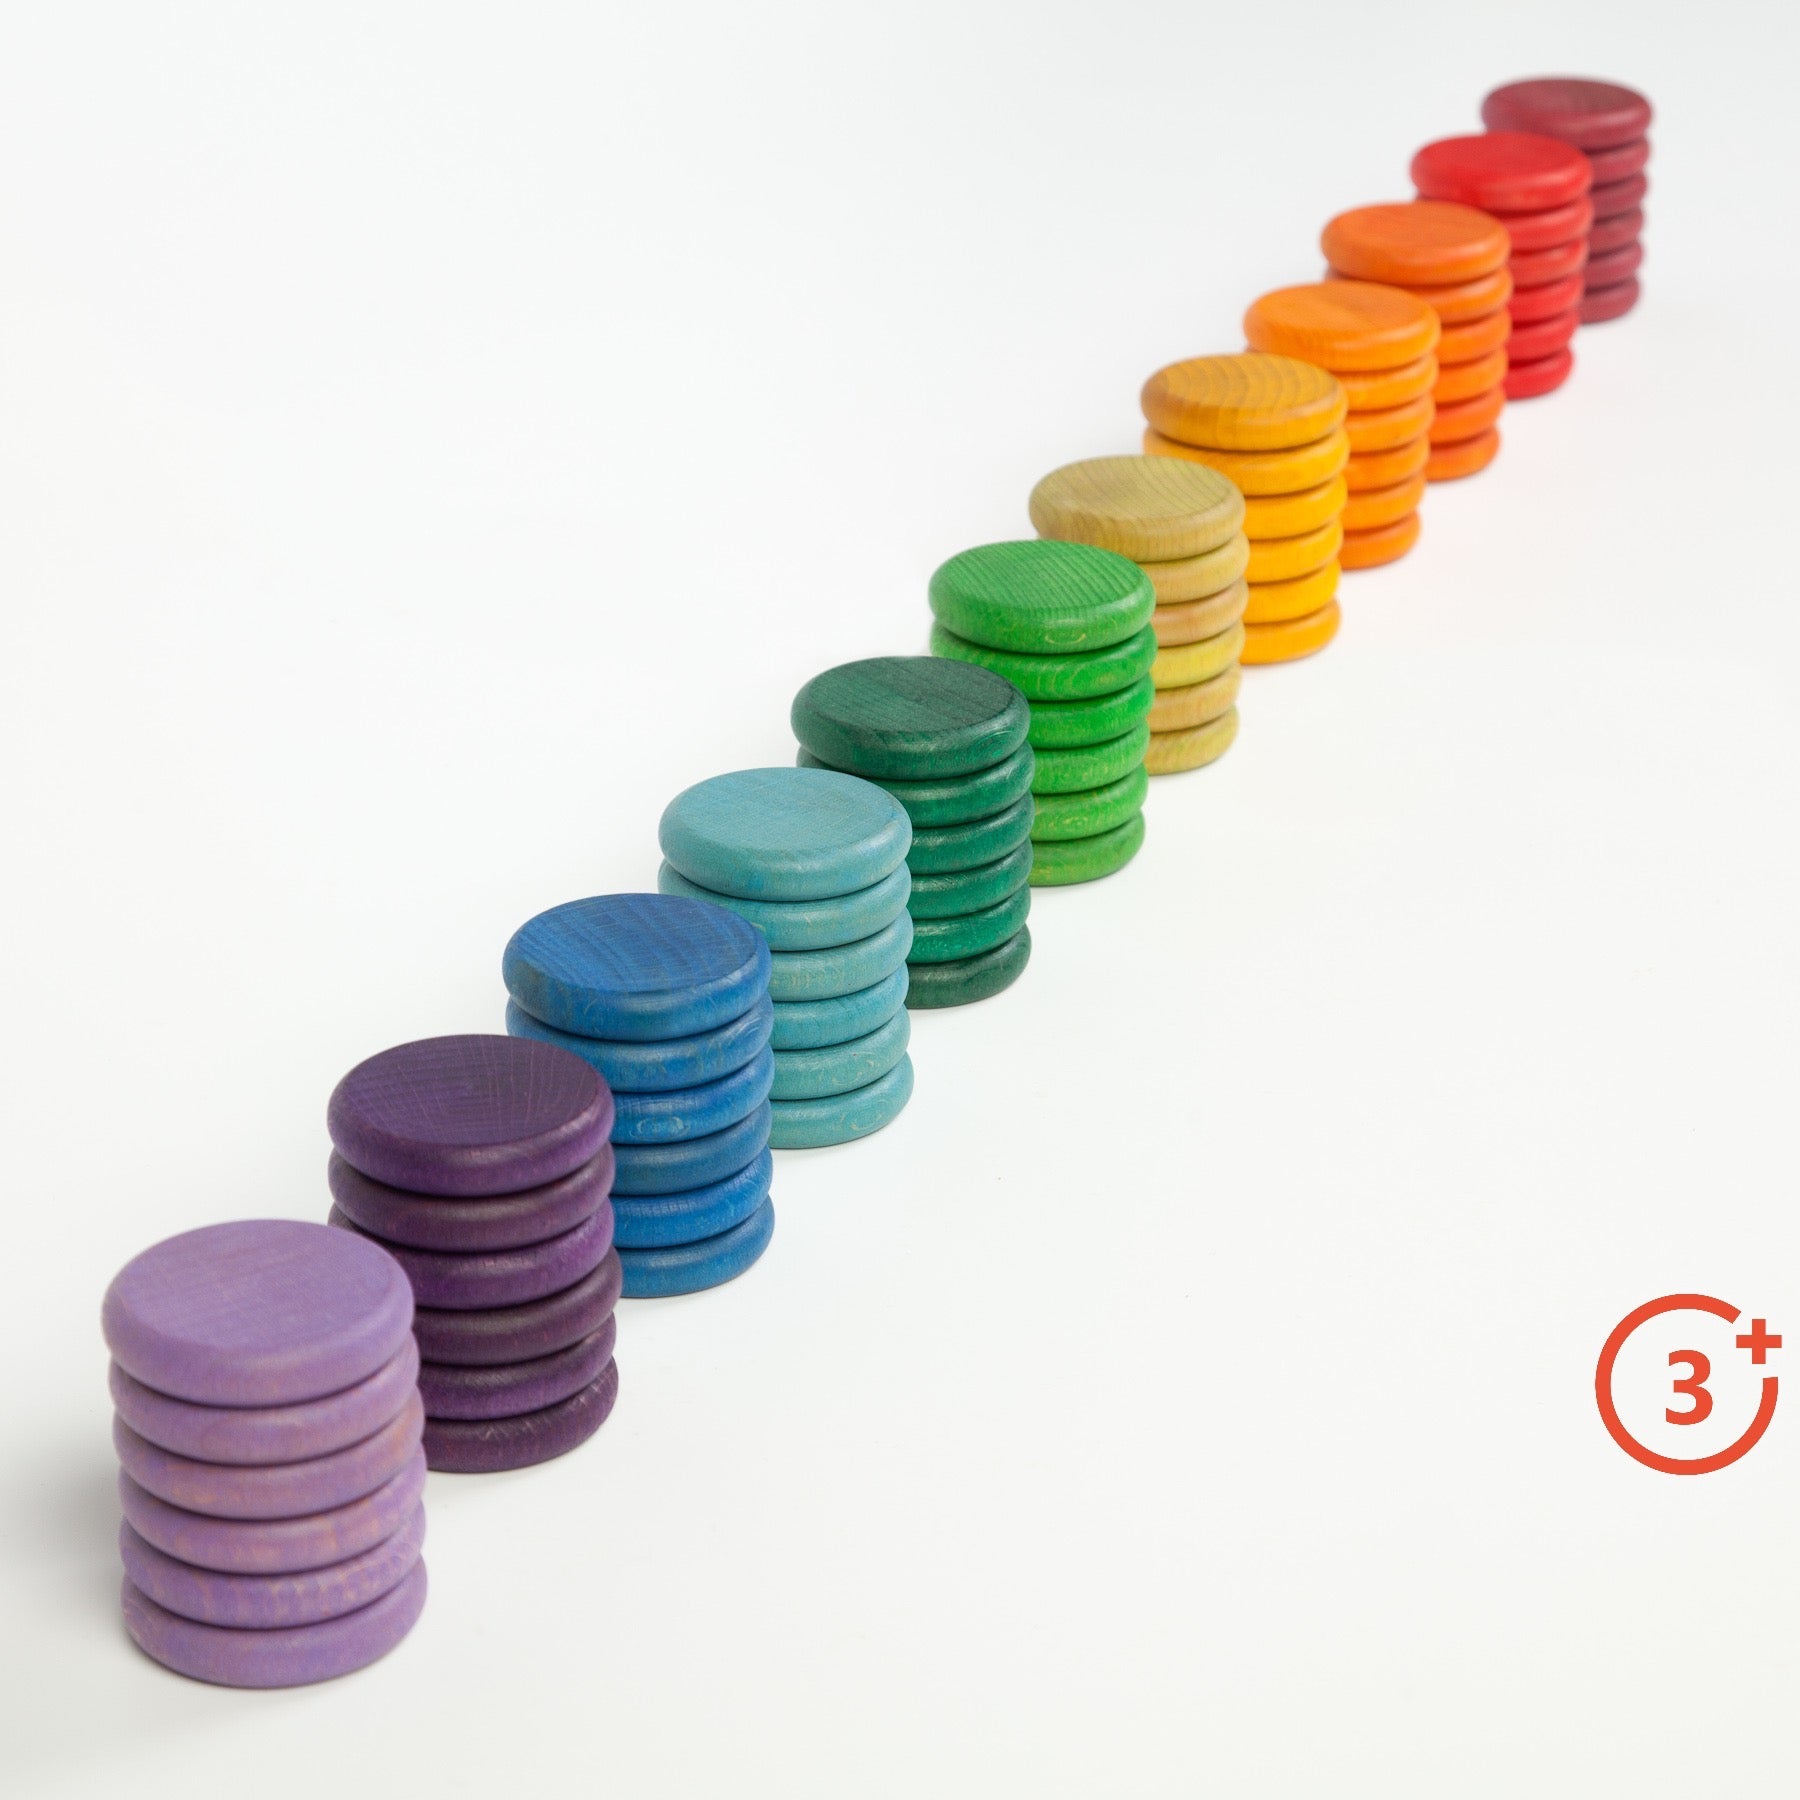 Grapat Coloured Coins - 72 pieces in 12 Colours-Grapat-Modern Rascals